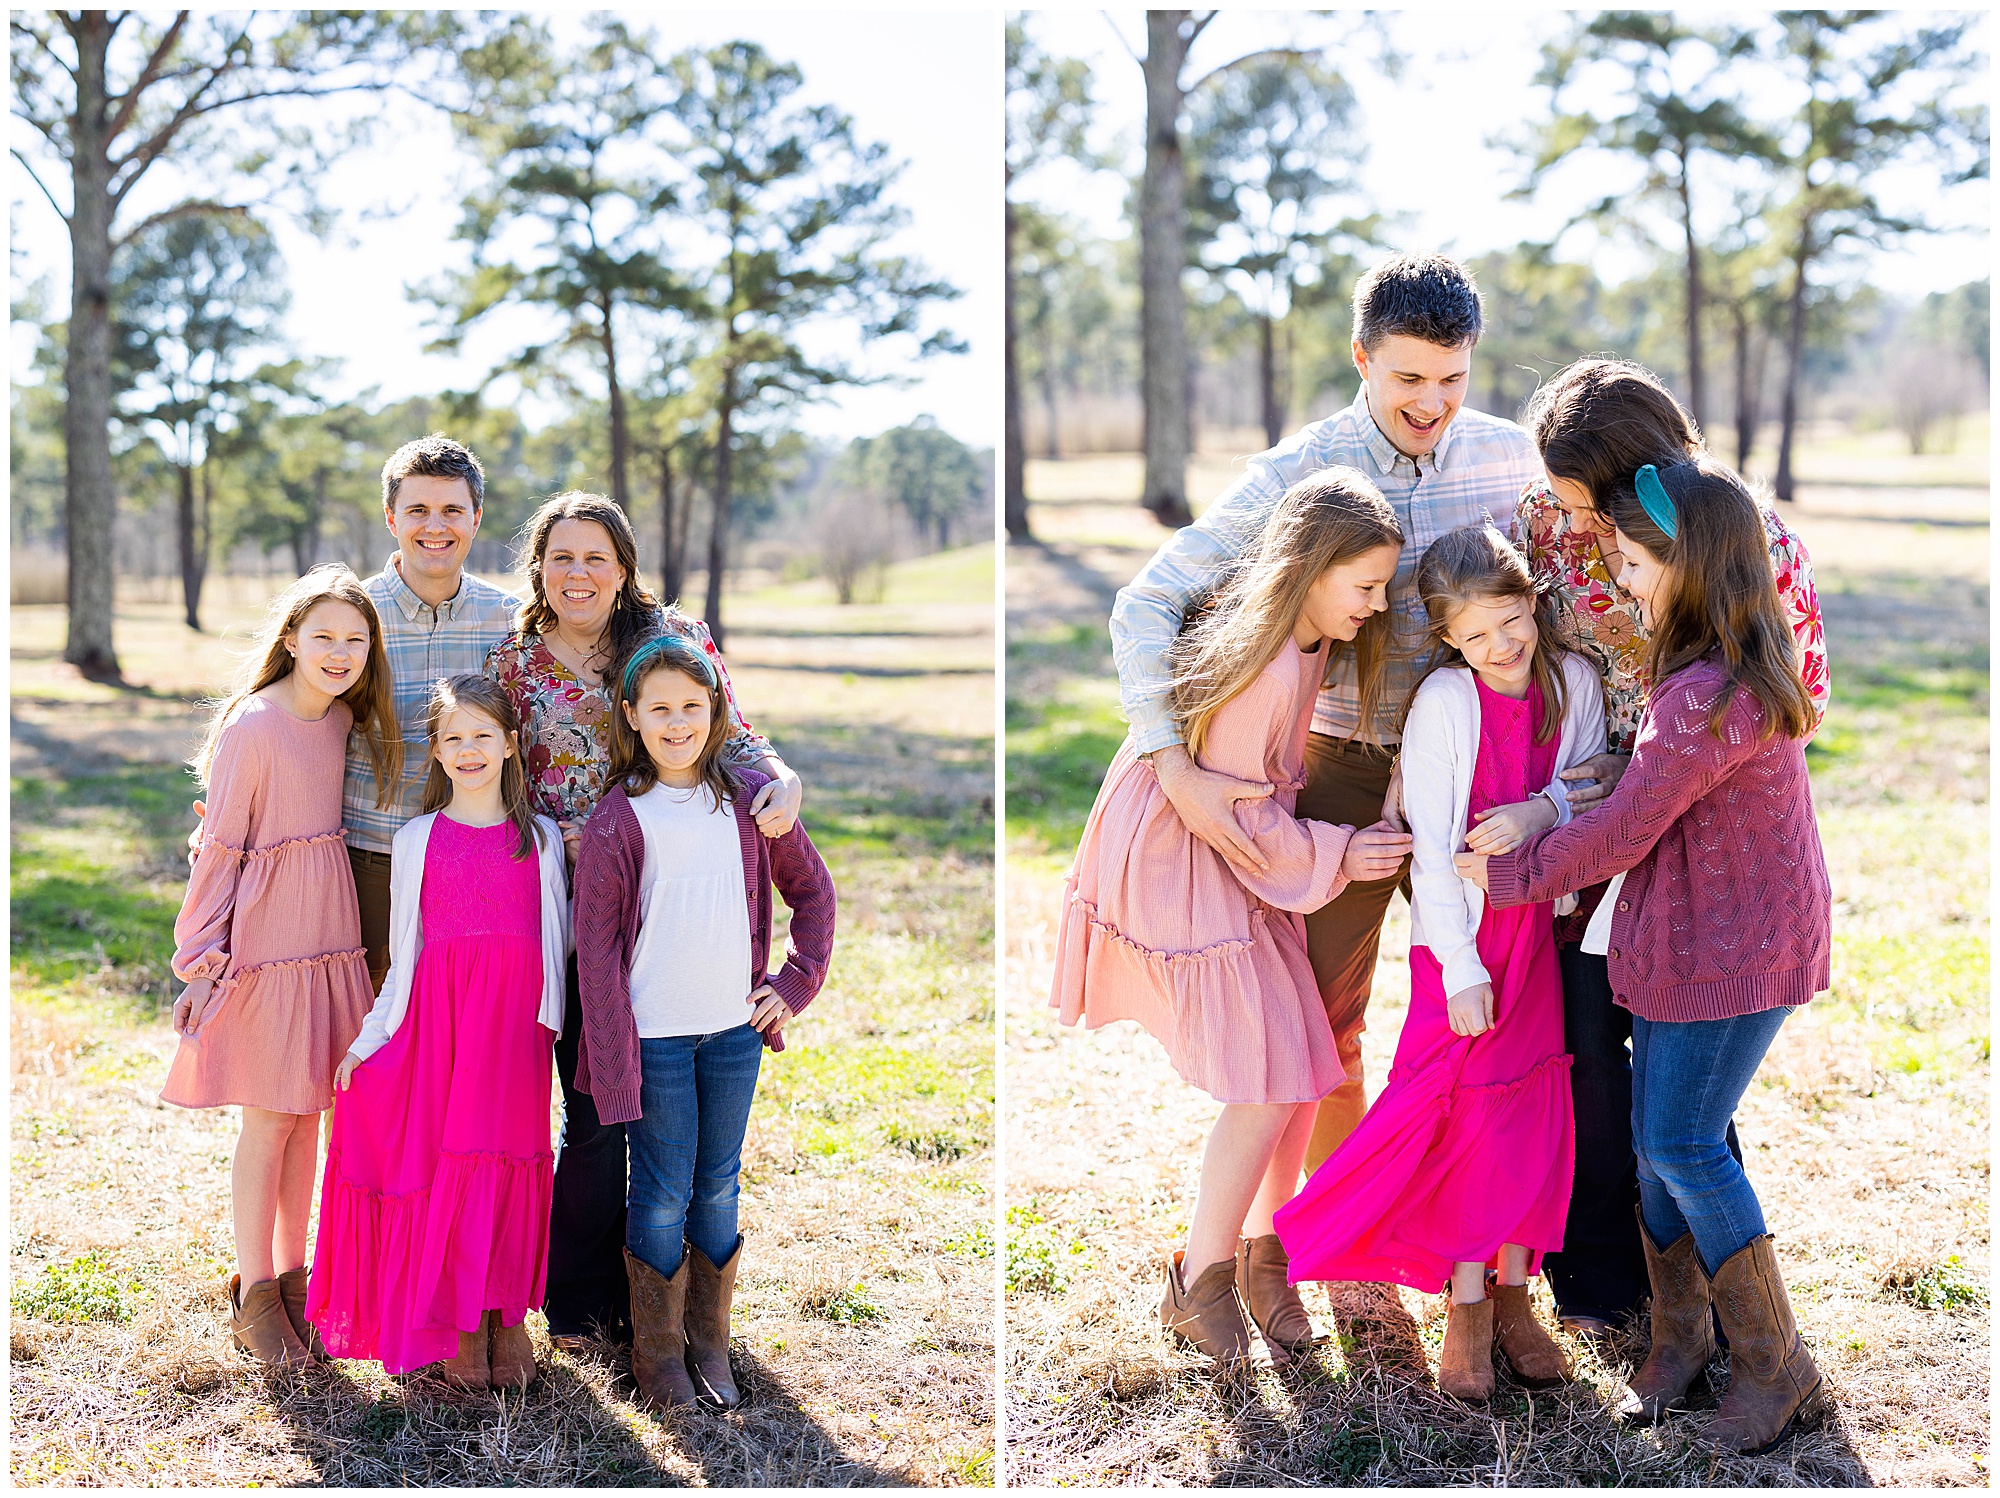 Eleanor Stenner Photography - a Birmingham, AL wedding photographer - photographs the Johnsons in her Valentine's Day Mini Sessions